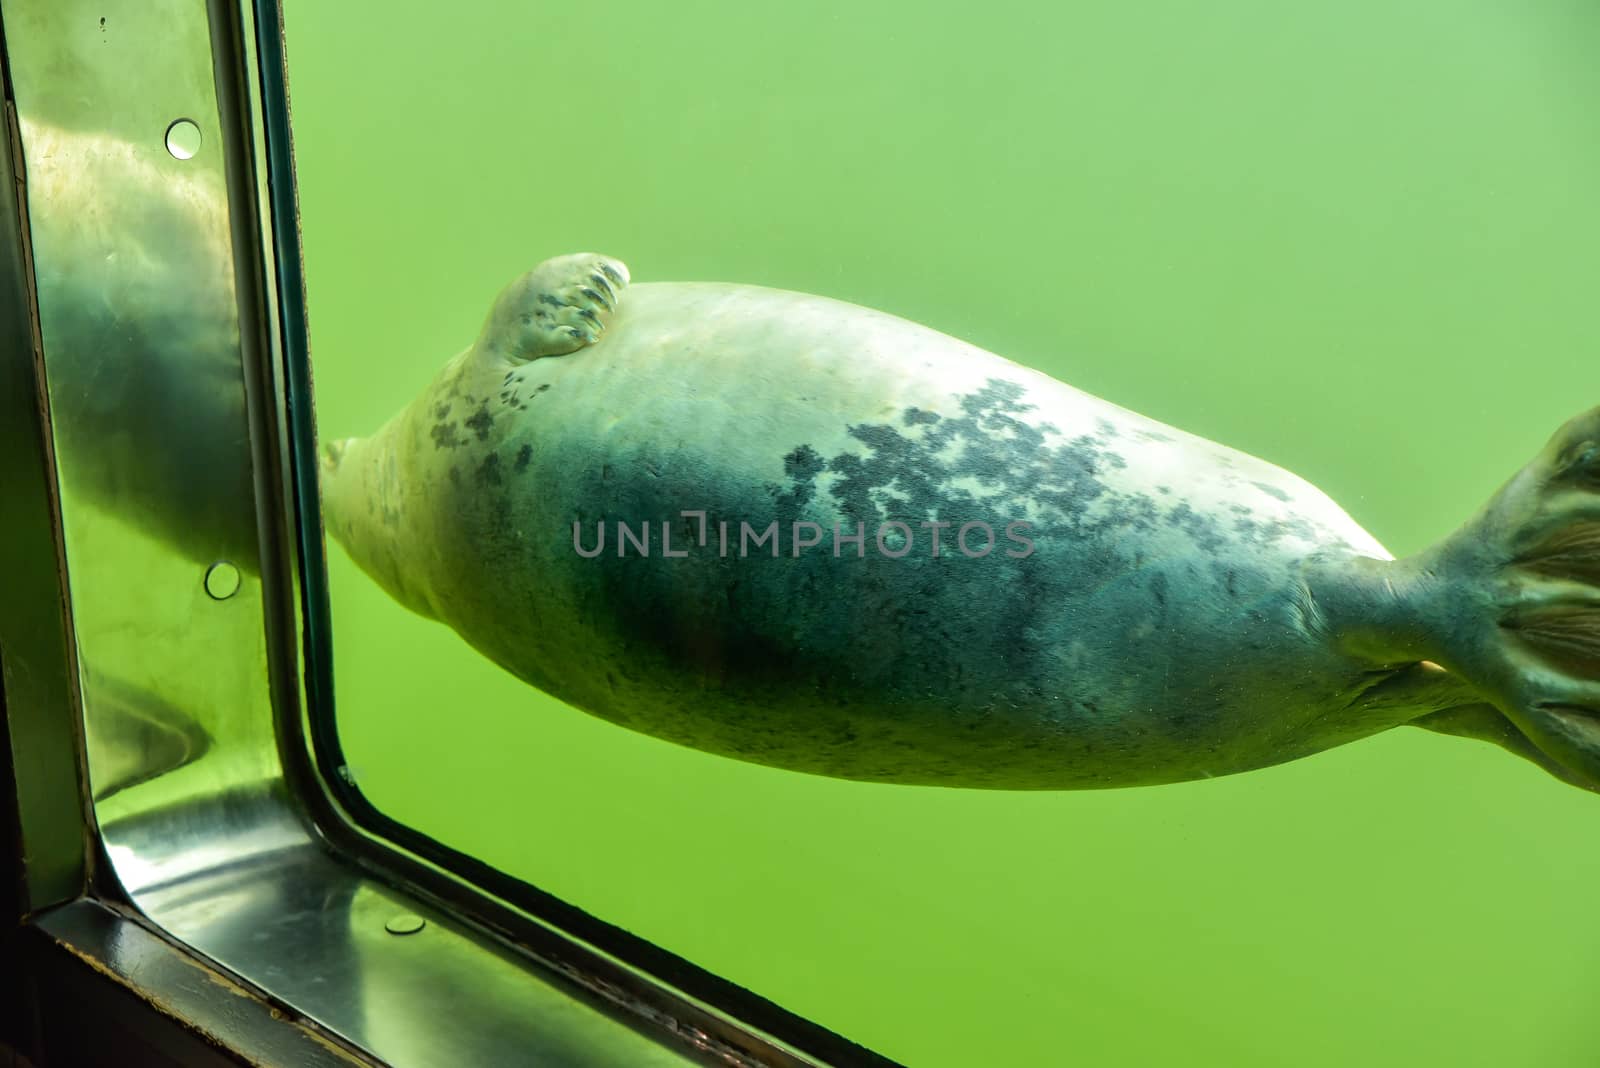 View through the underwater window of a swimming seal in green water as tourist attraction